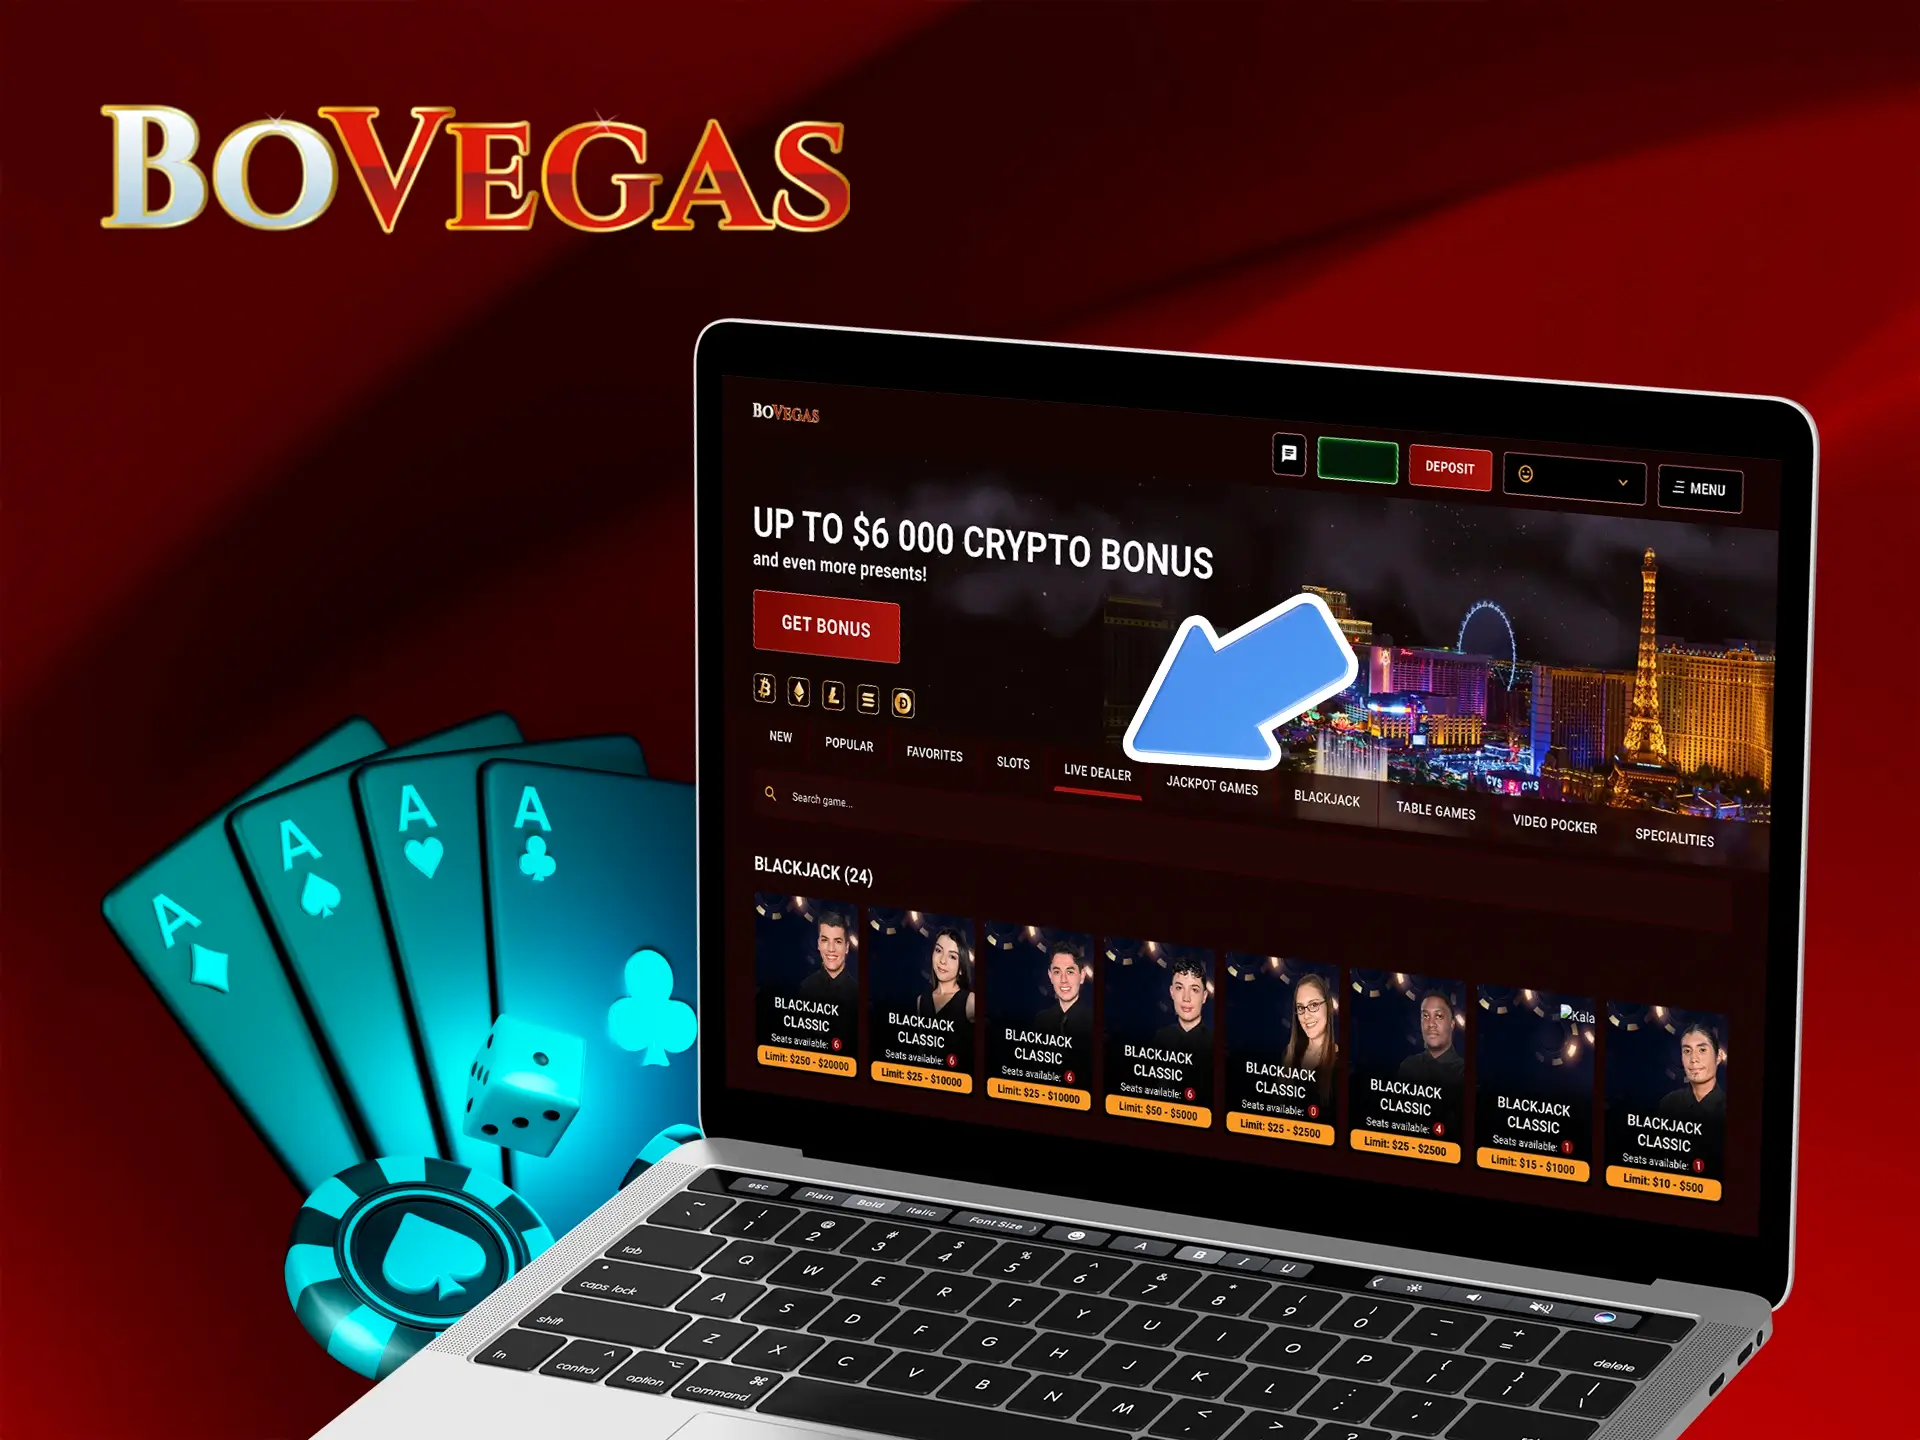 Create your account and immerse yourself in the world of BoVegas Casino online gaming.